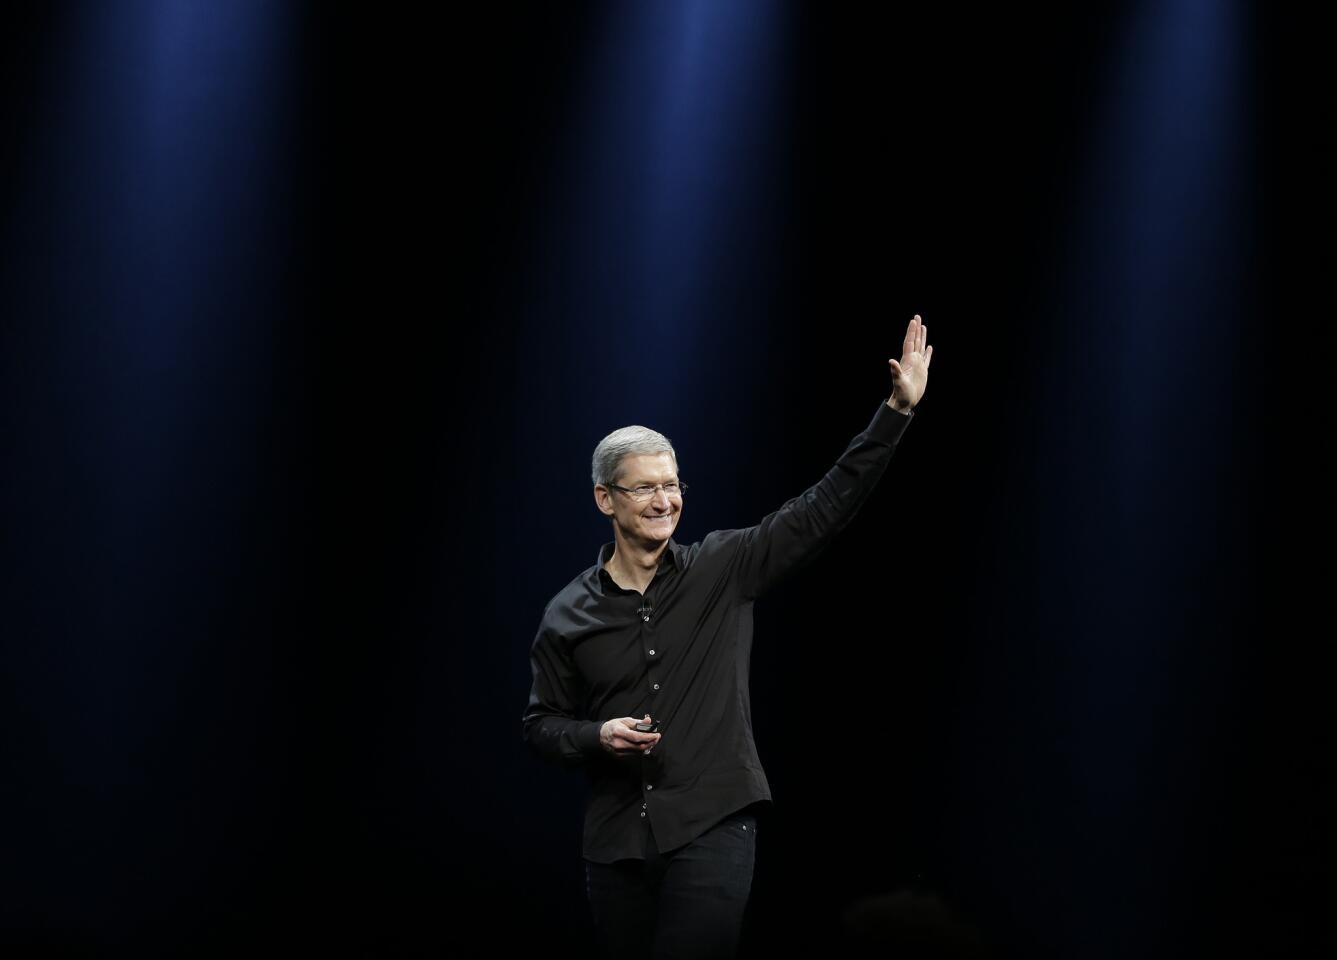 A coffee date with Apple CEO Tim Cook was also auctioned this year for charity. The winning bid was $610,000.